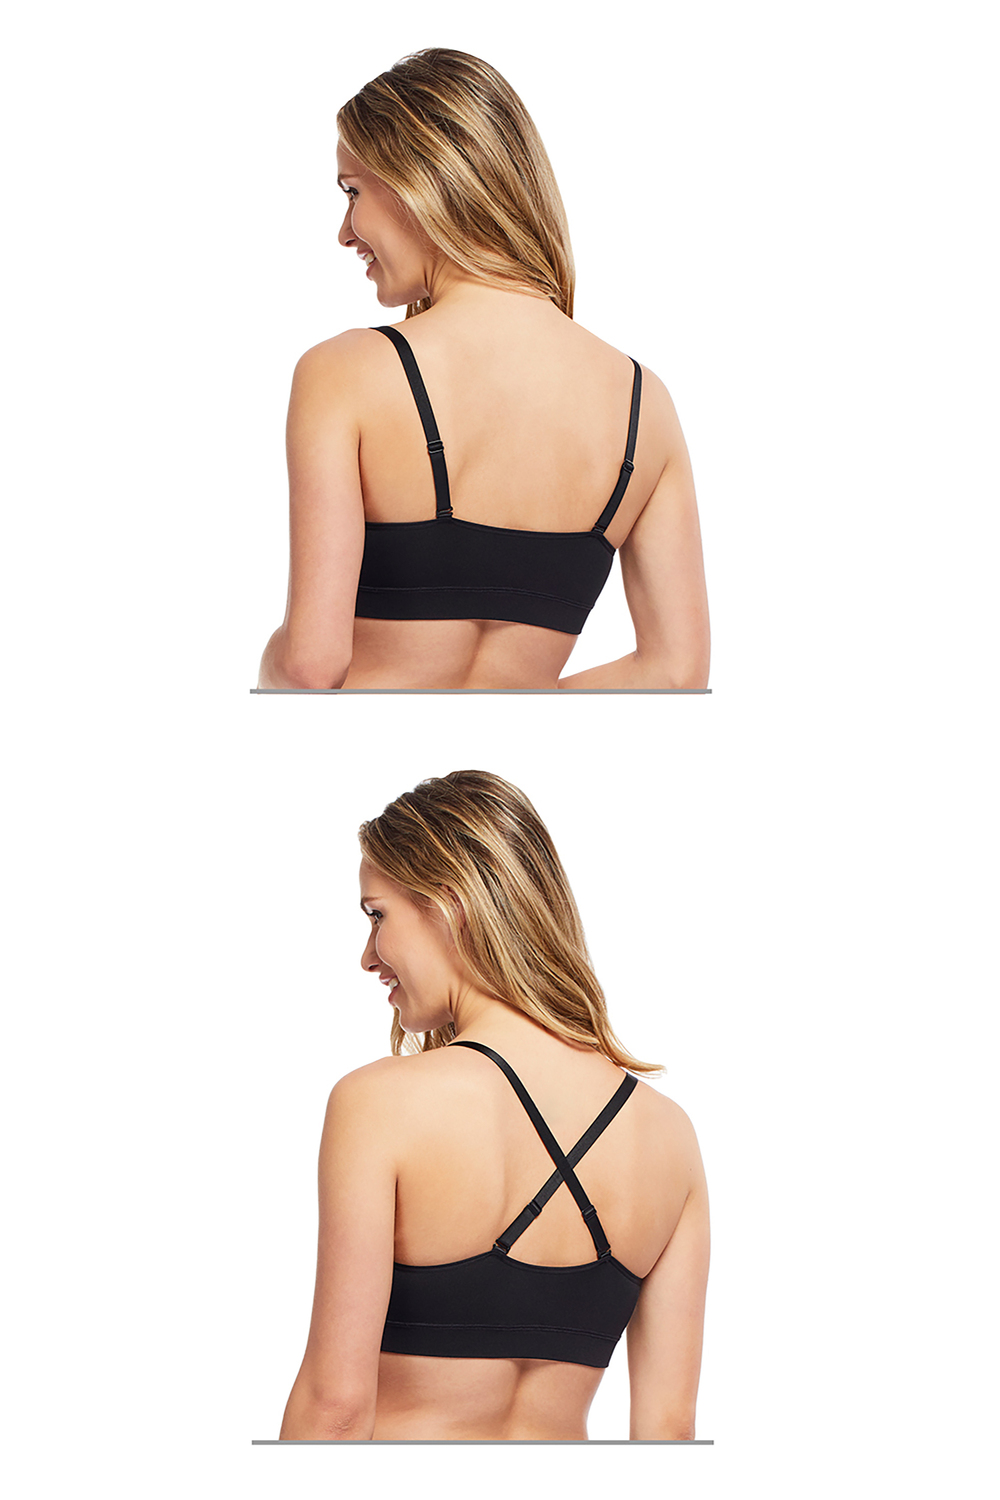 Buy Lovable Women's Cotton Seamed Non-Wired Regular Straps Non